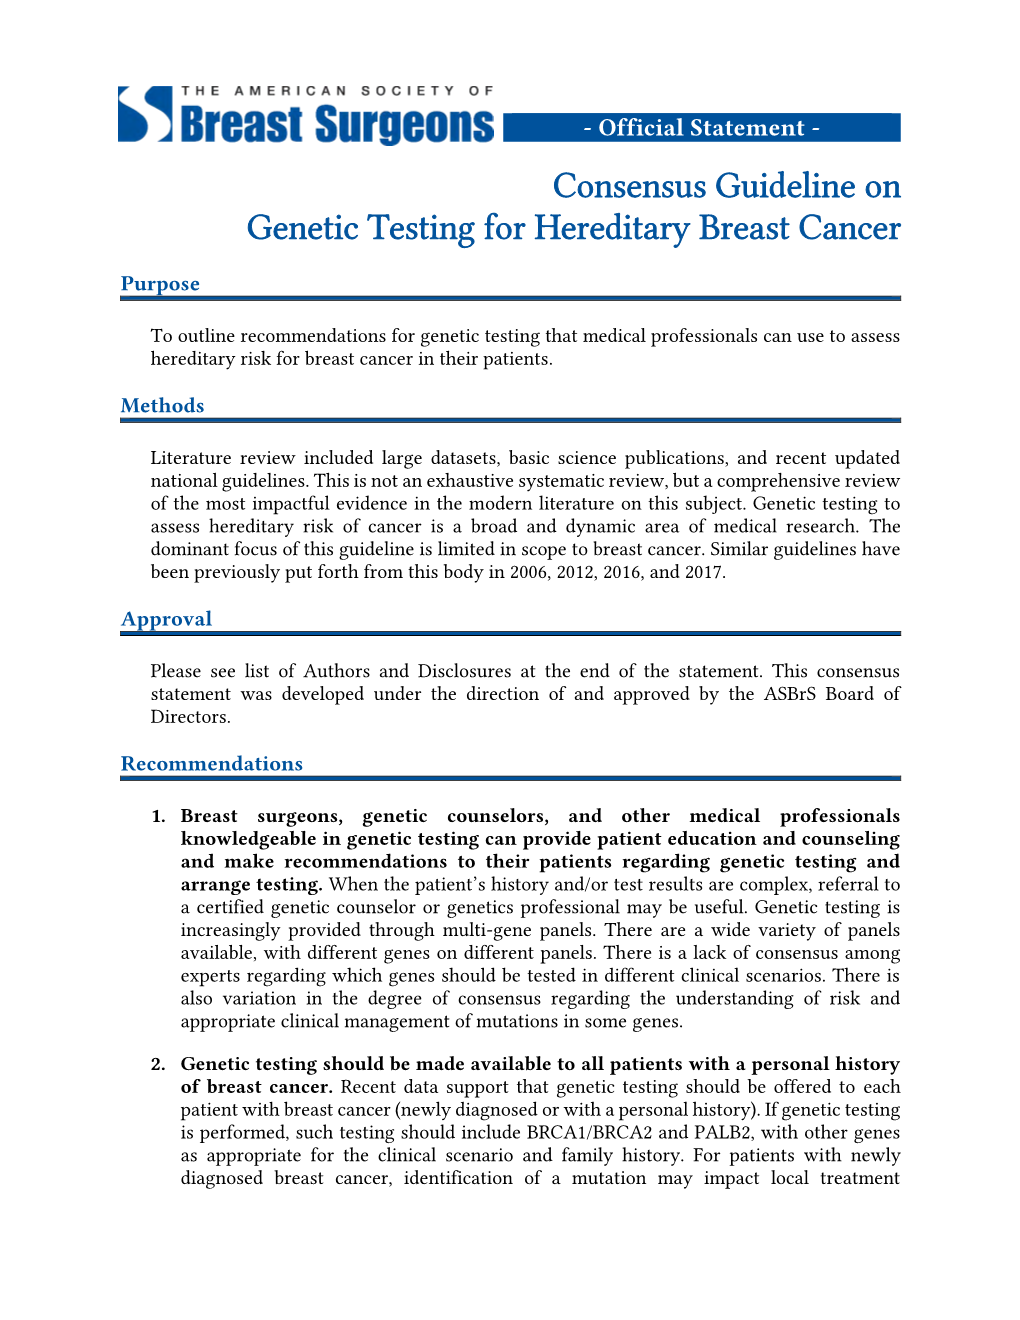 Consensus Guideline on Genetic Testing for Hereditary Breast Cancer